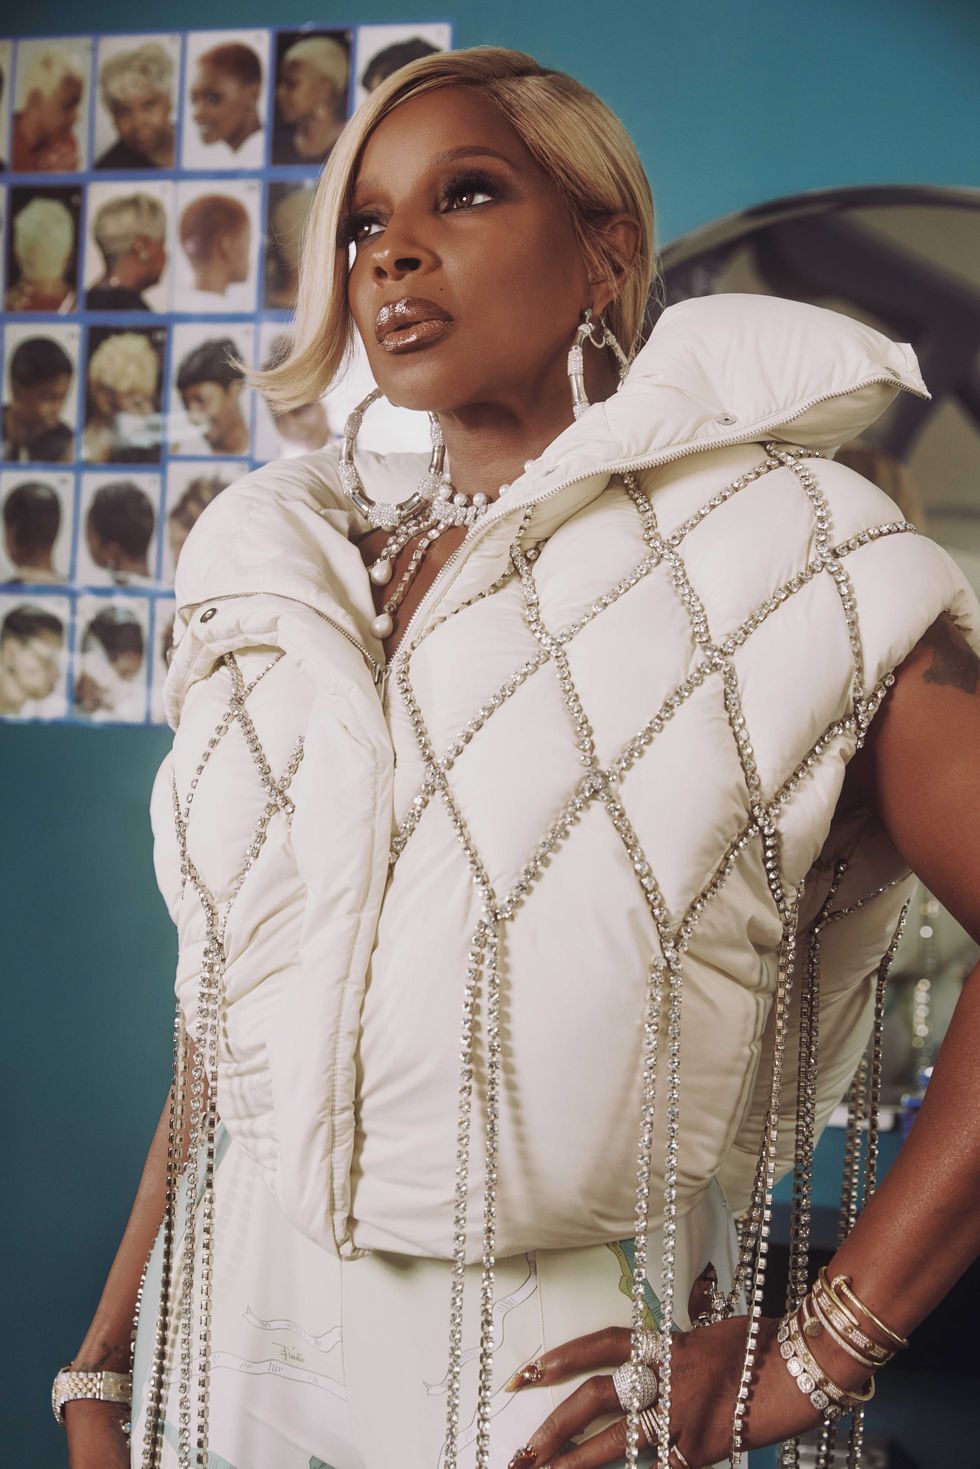 Porn Wearing Lots Of Jewelry - Mary J. Blige on Navigating Self-Acceptance Through Beauty